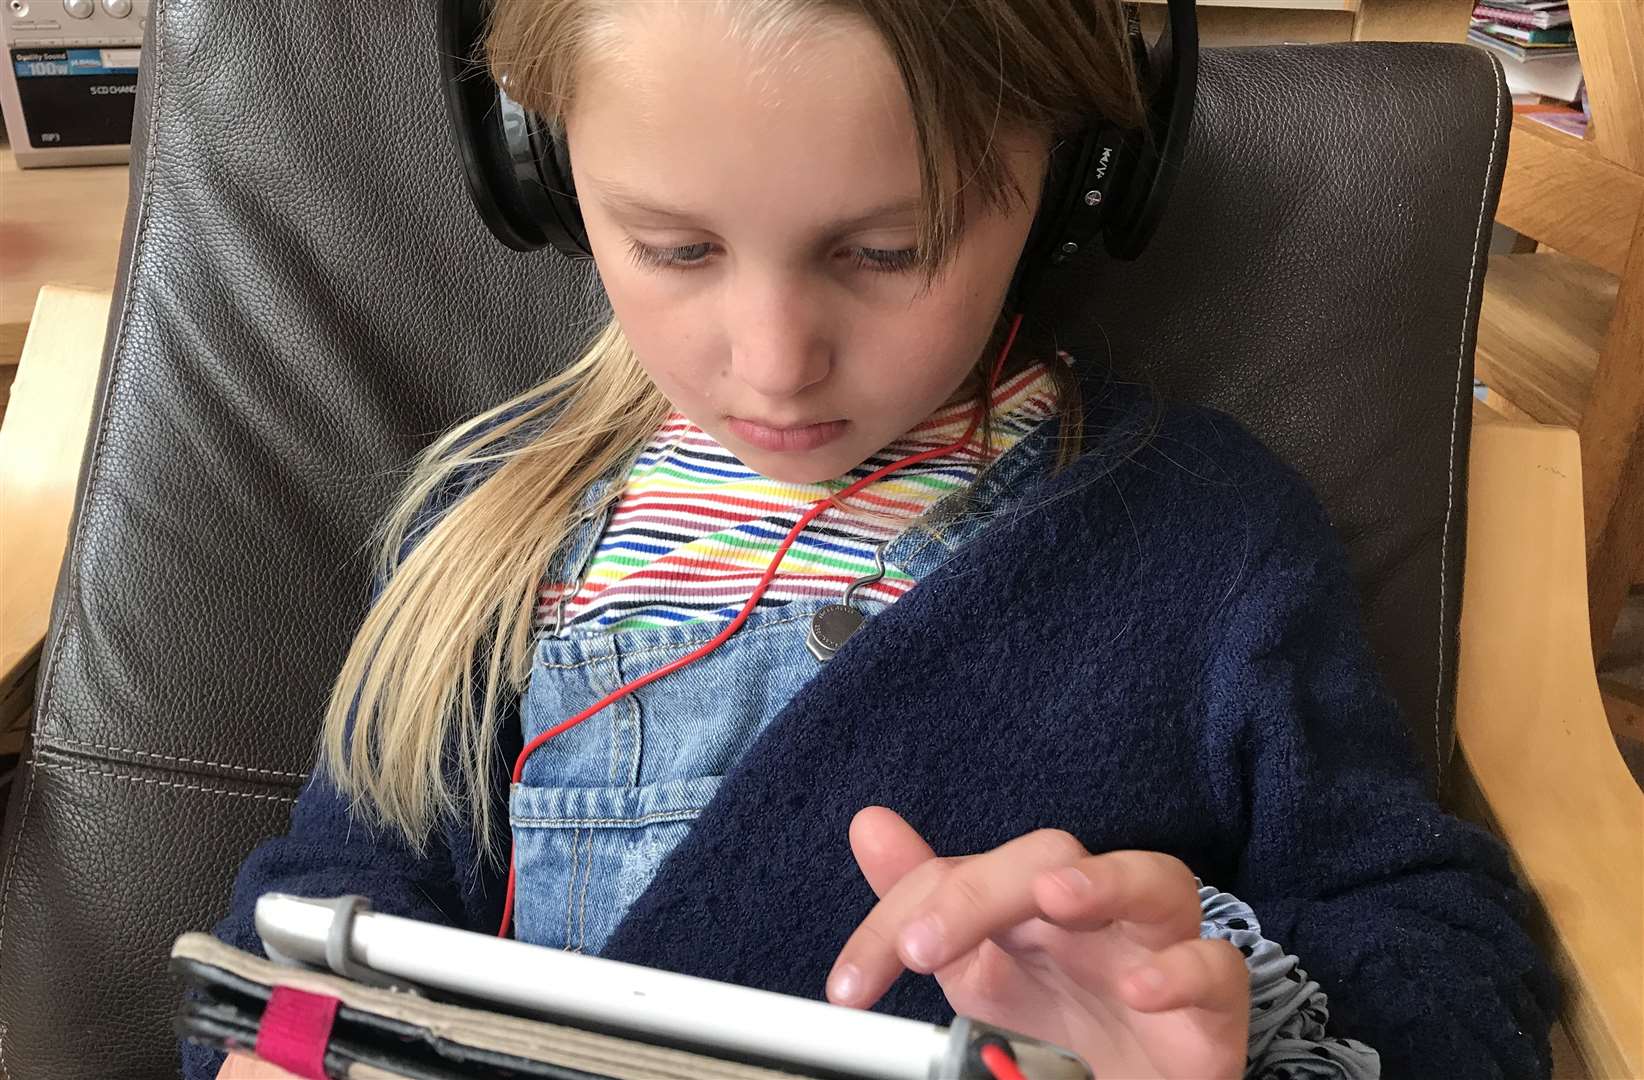 Liv, 6, has definitely spent more time than normal glued to a tablet